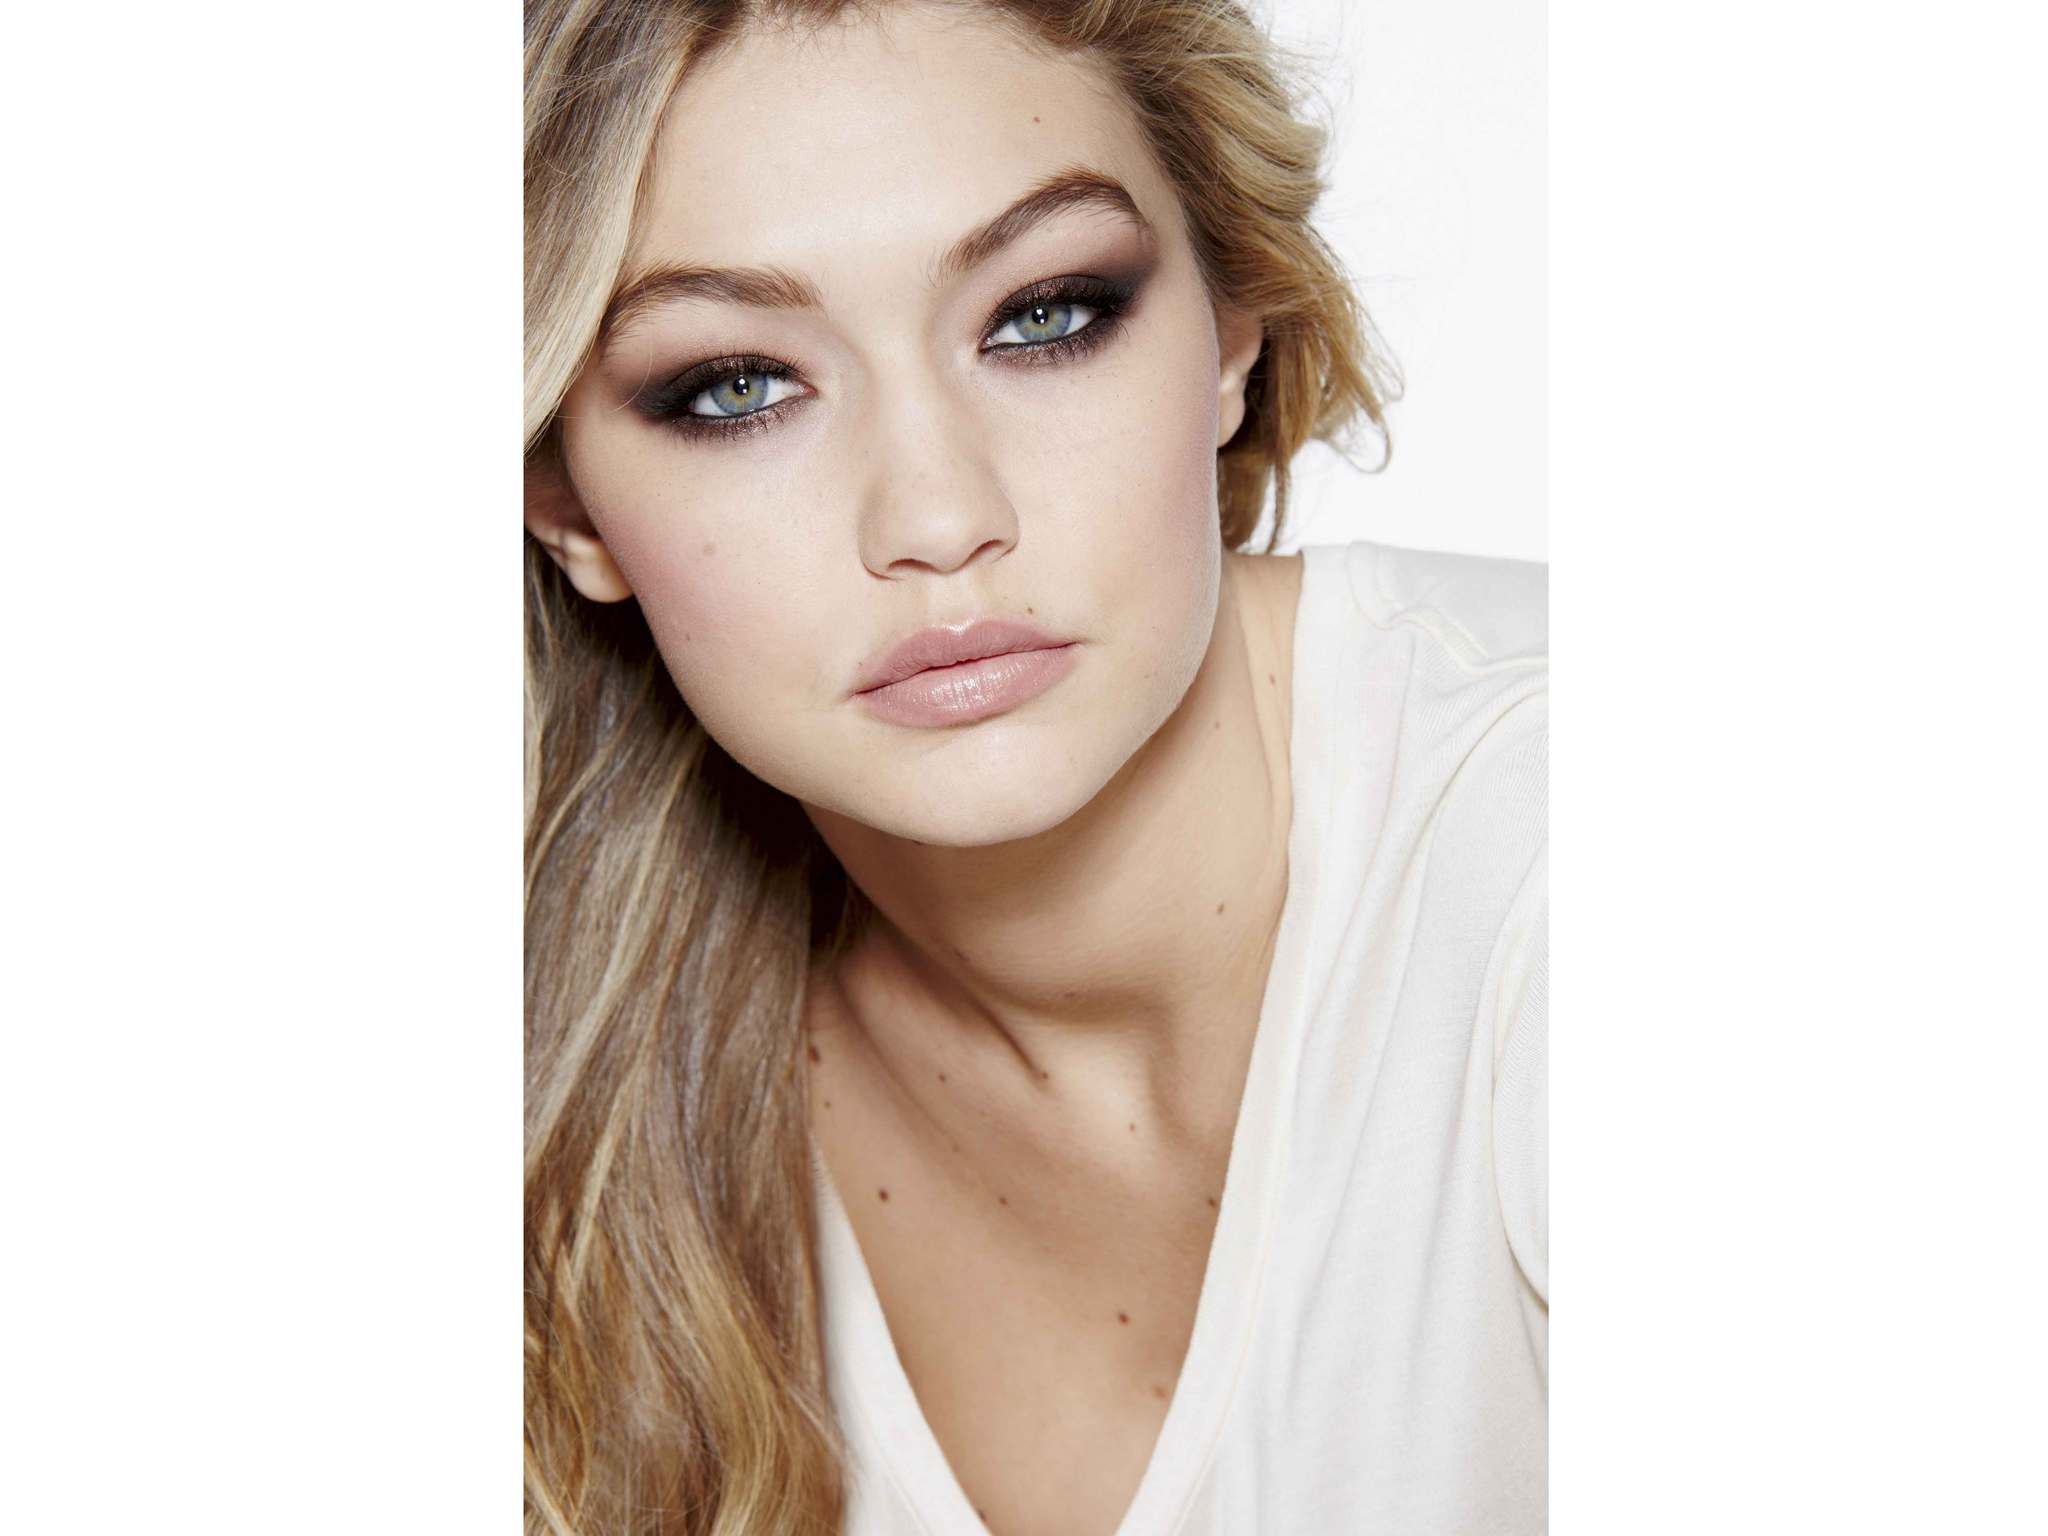 Gigi Hadid Unveiled As The New Face Of Maybelline The